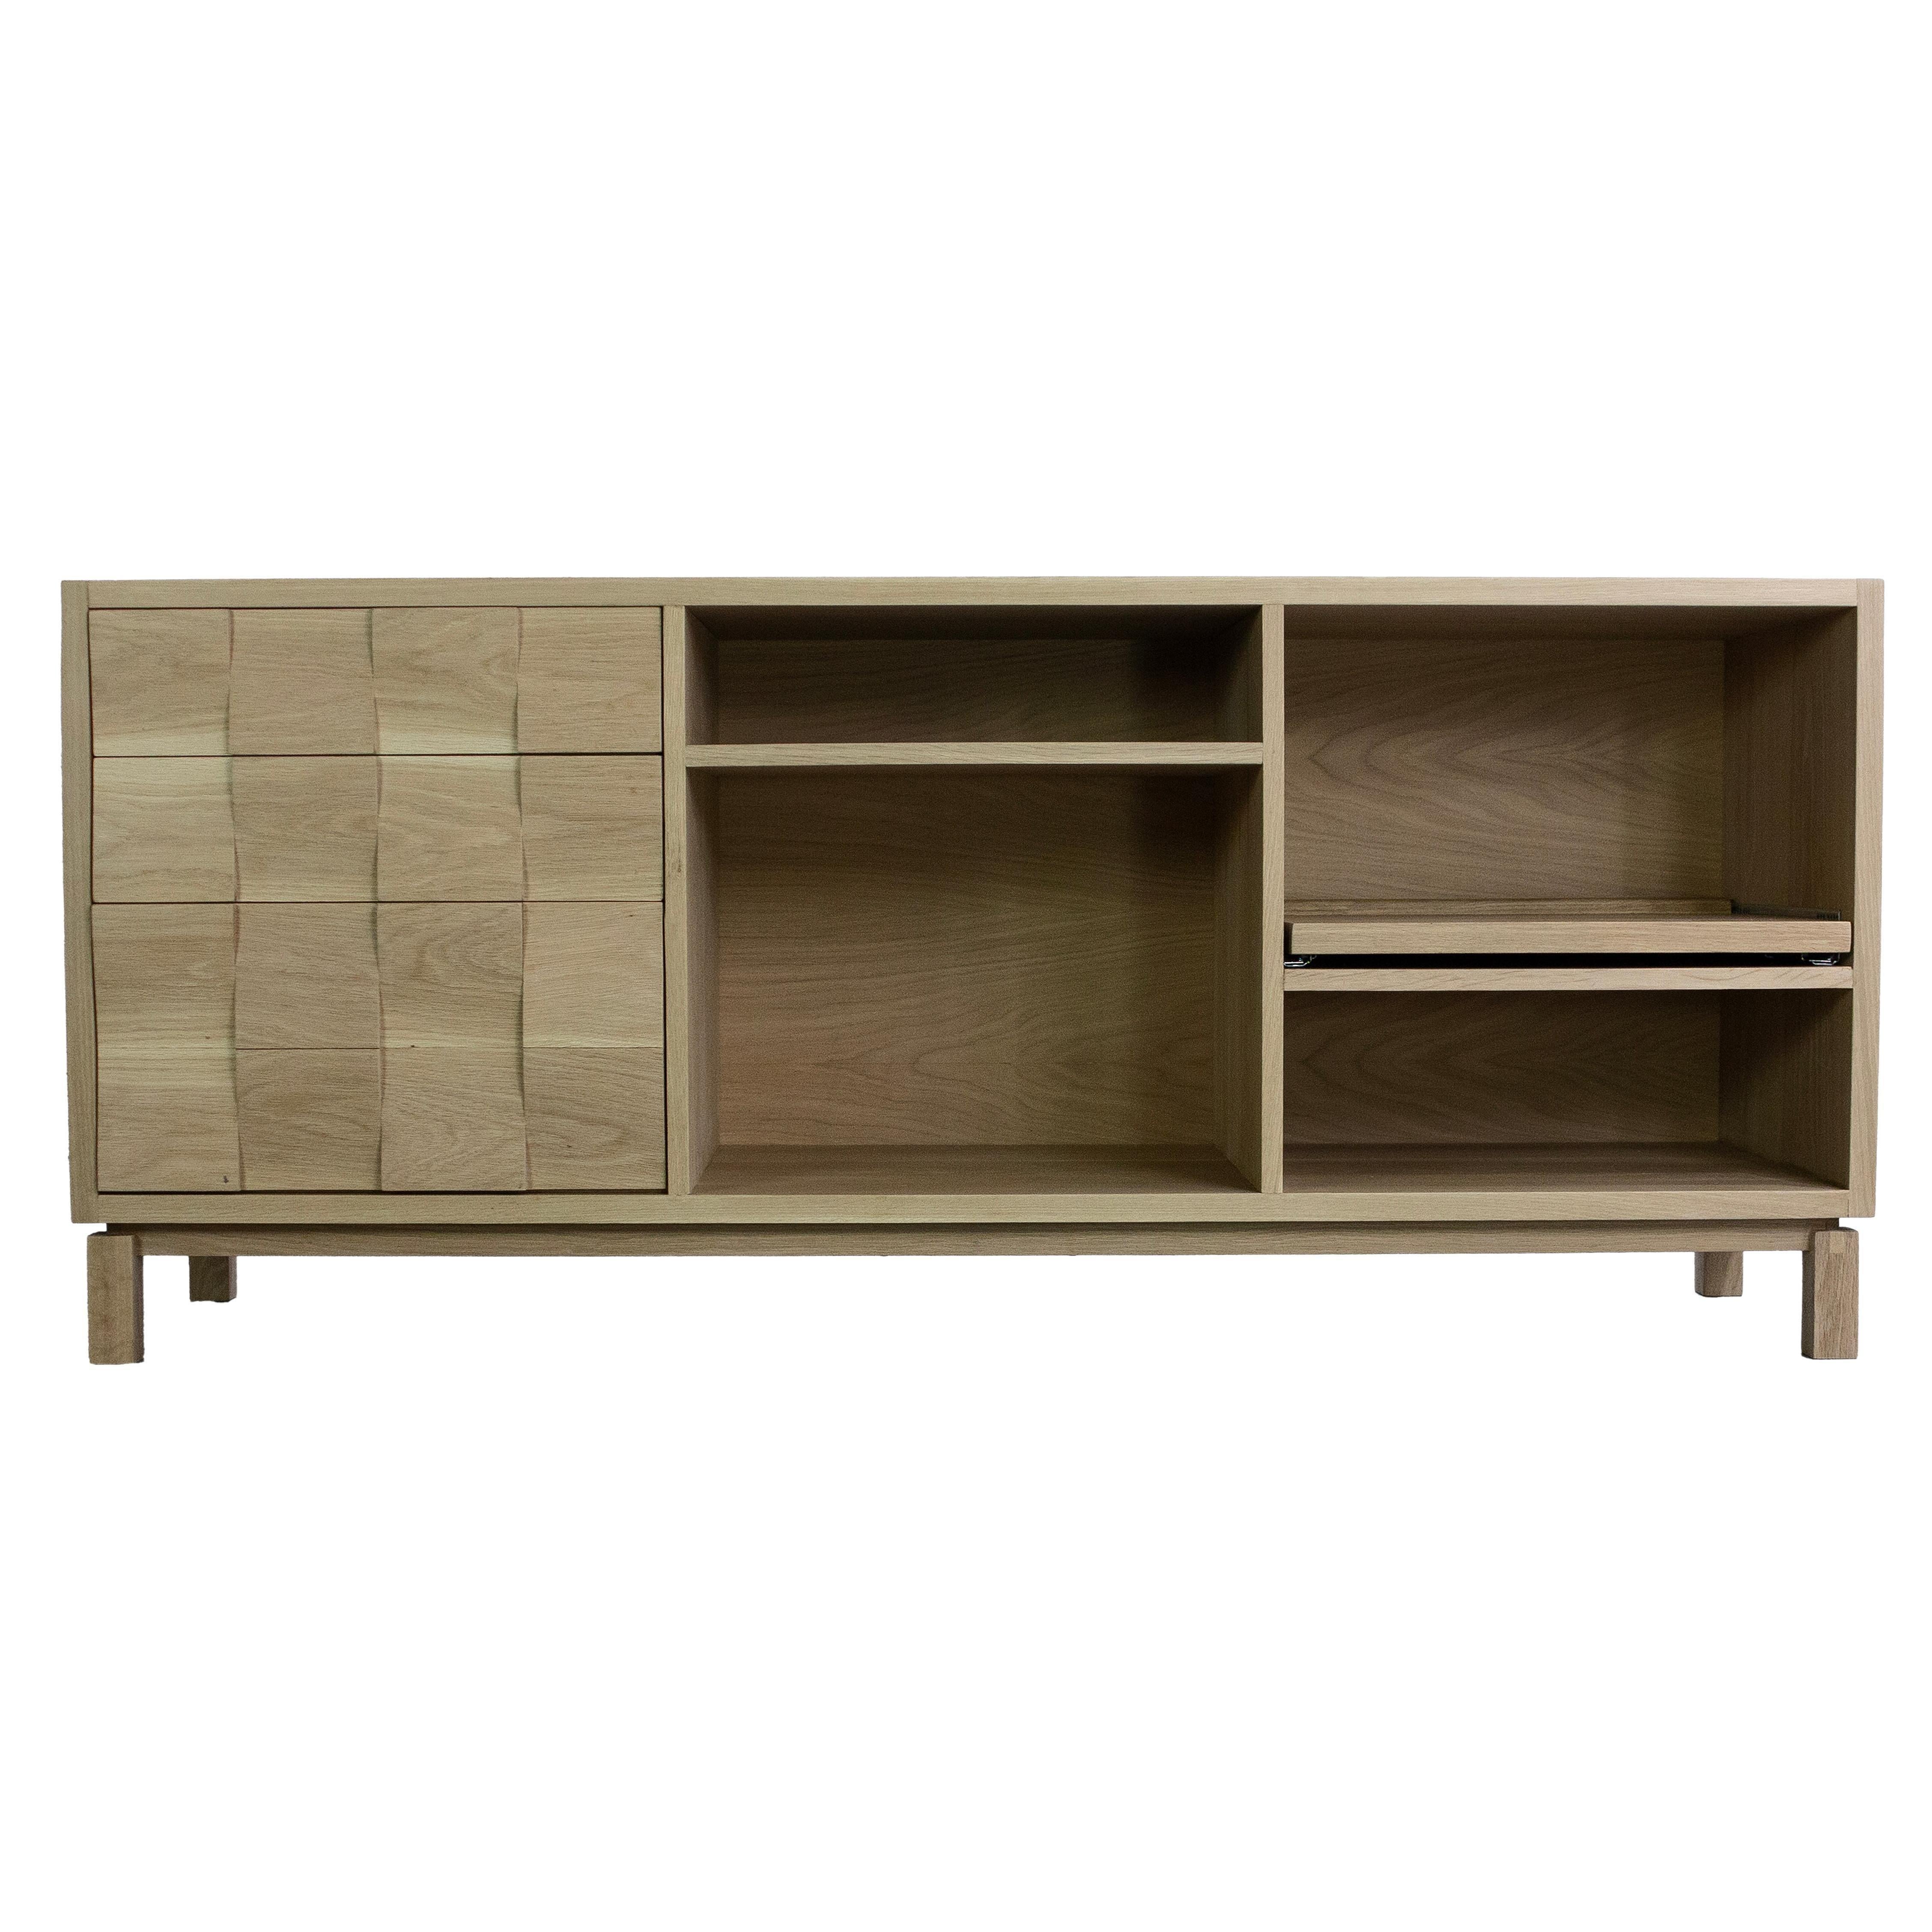 MEDIA CREDENZA in white oak featuring a push to open turntable shelf.